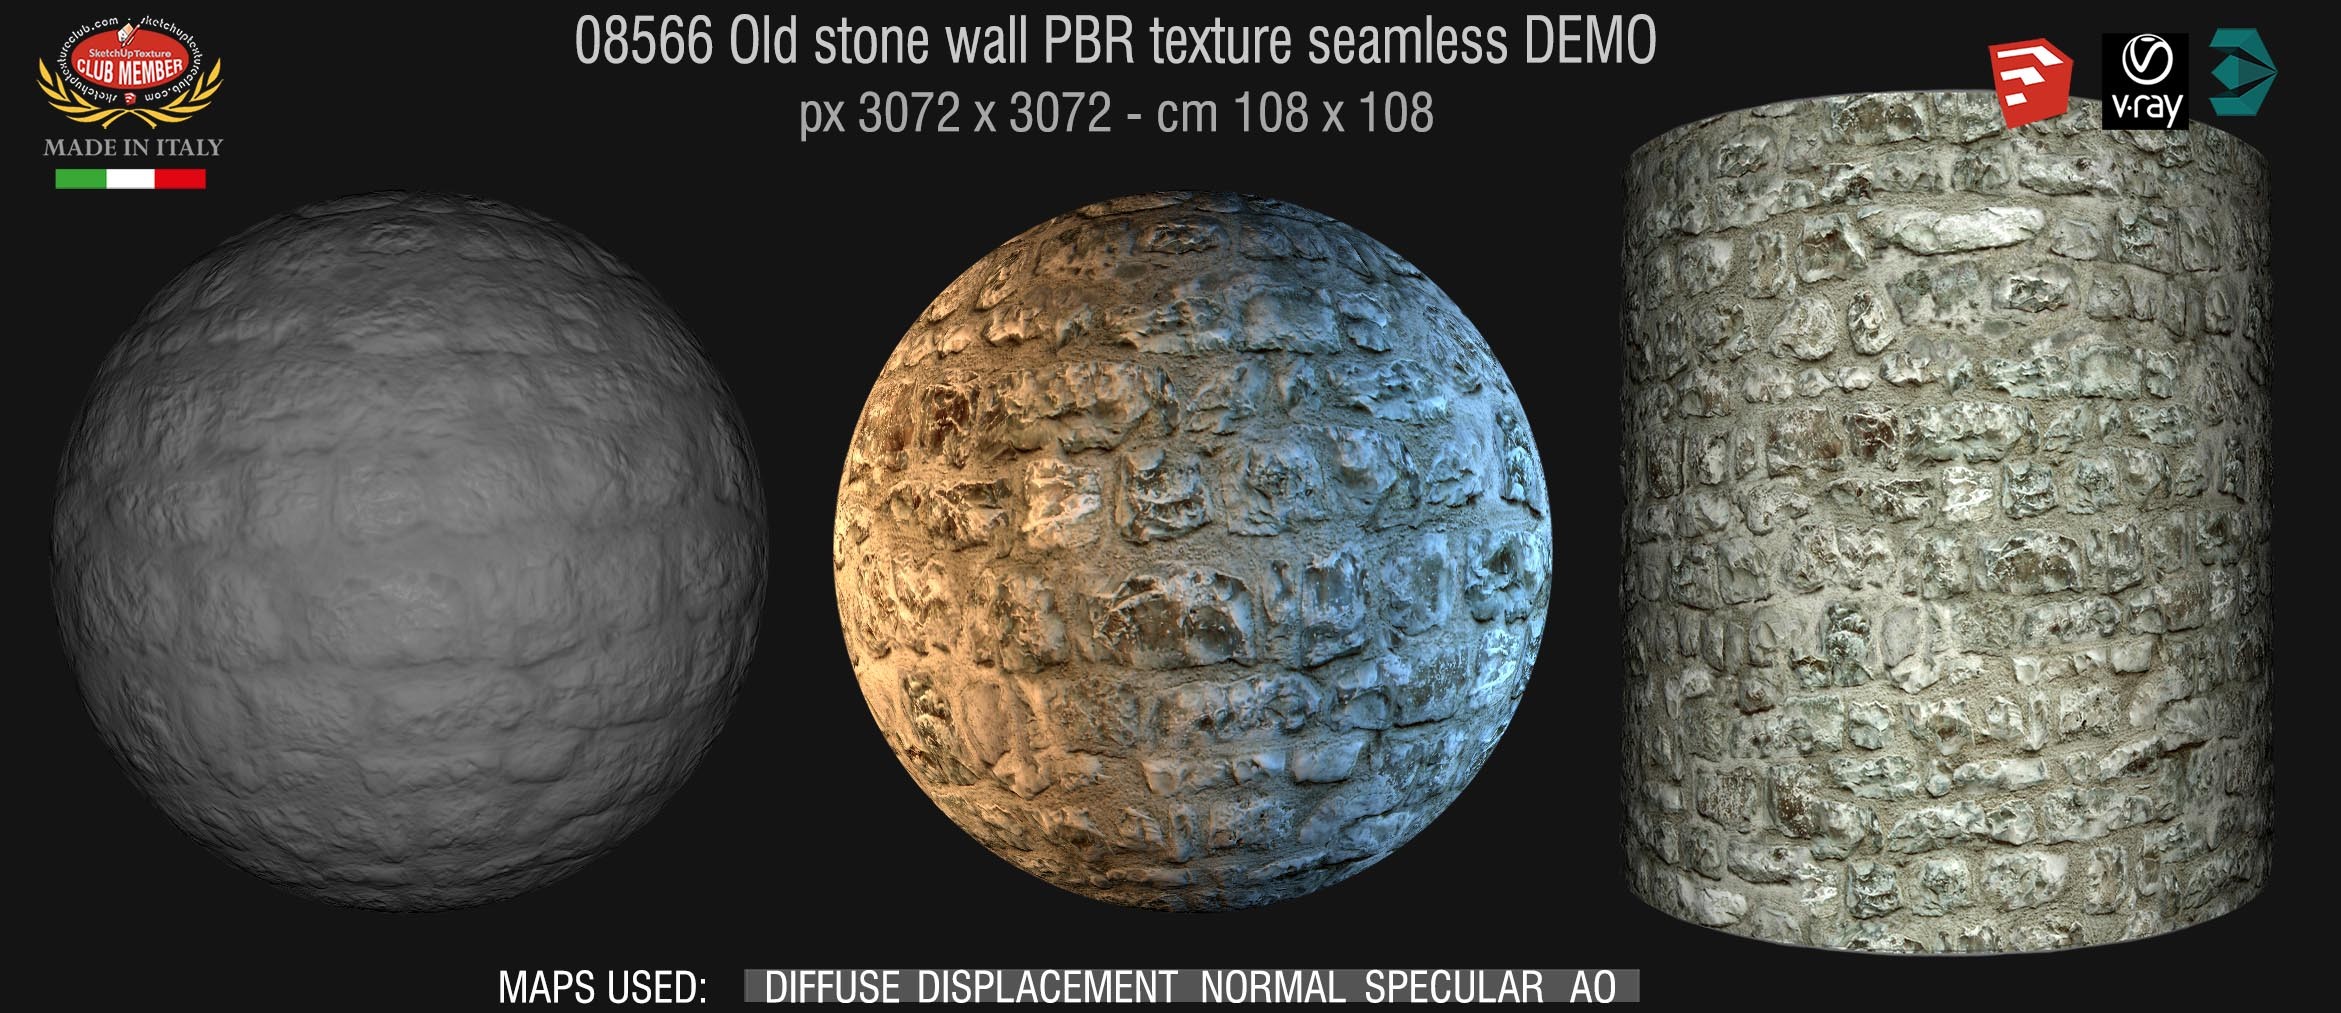 08566 Old stone wall PBR texture seamless DEMO